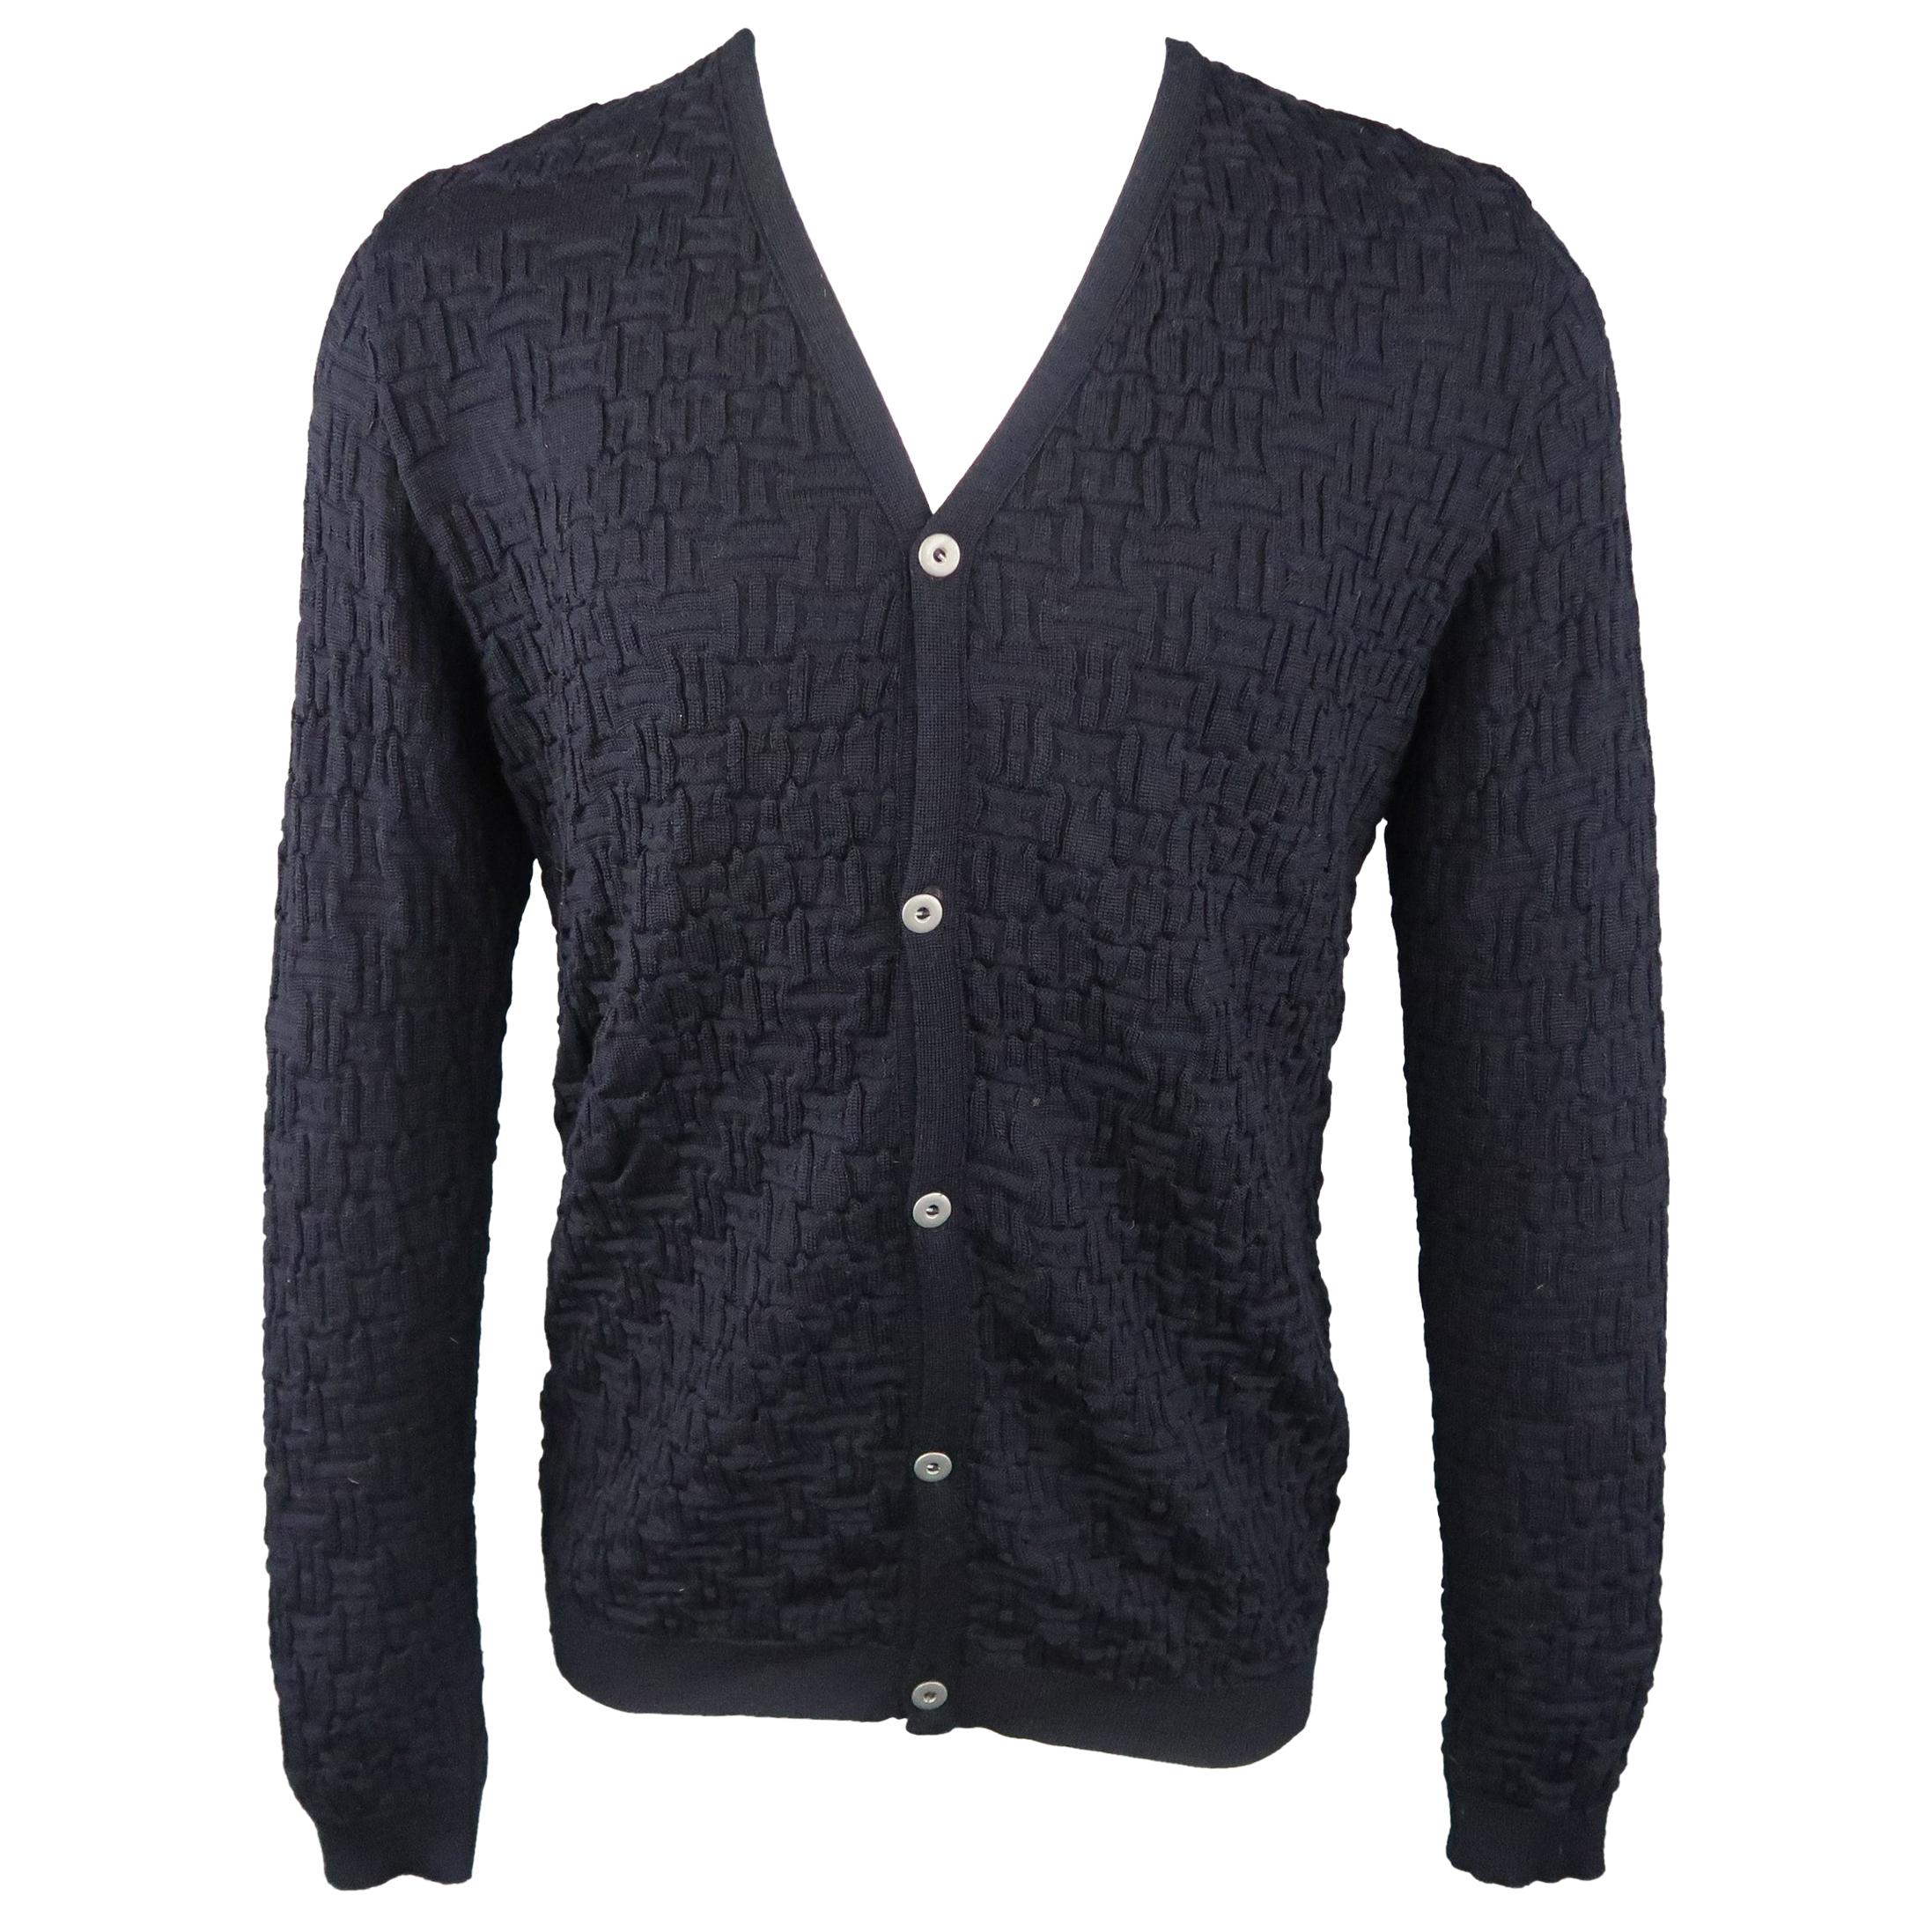 S.N.S HERNING Size M Navy Wool Textured Knit V Neck Cardigan